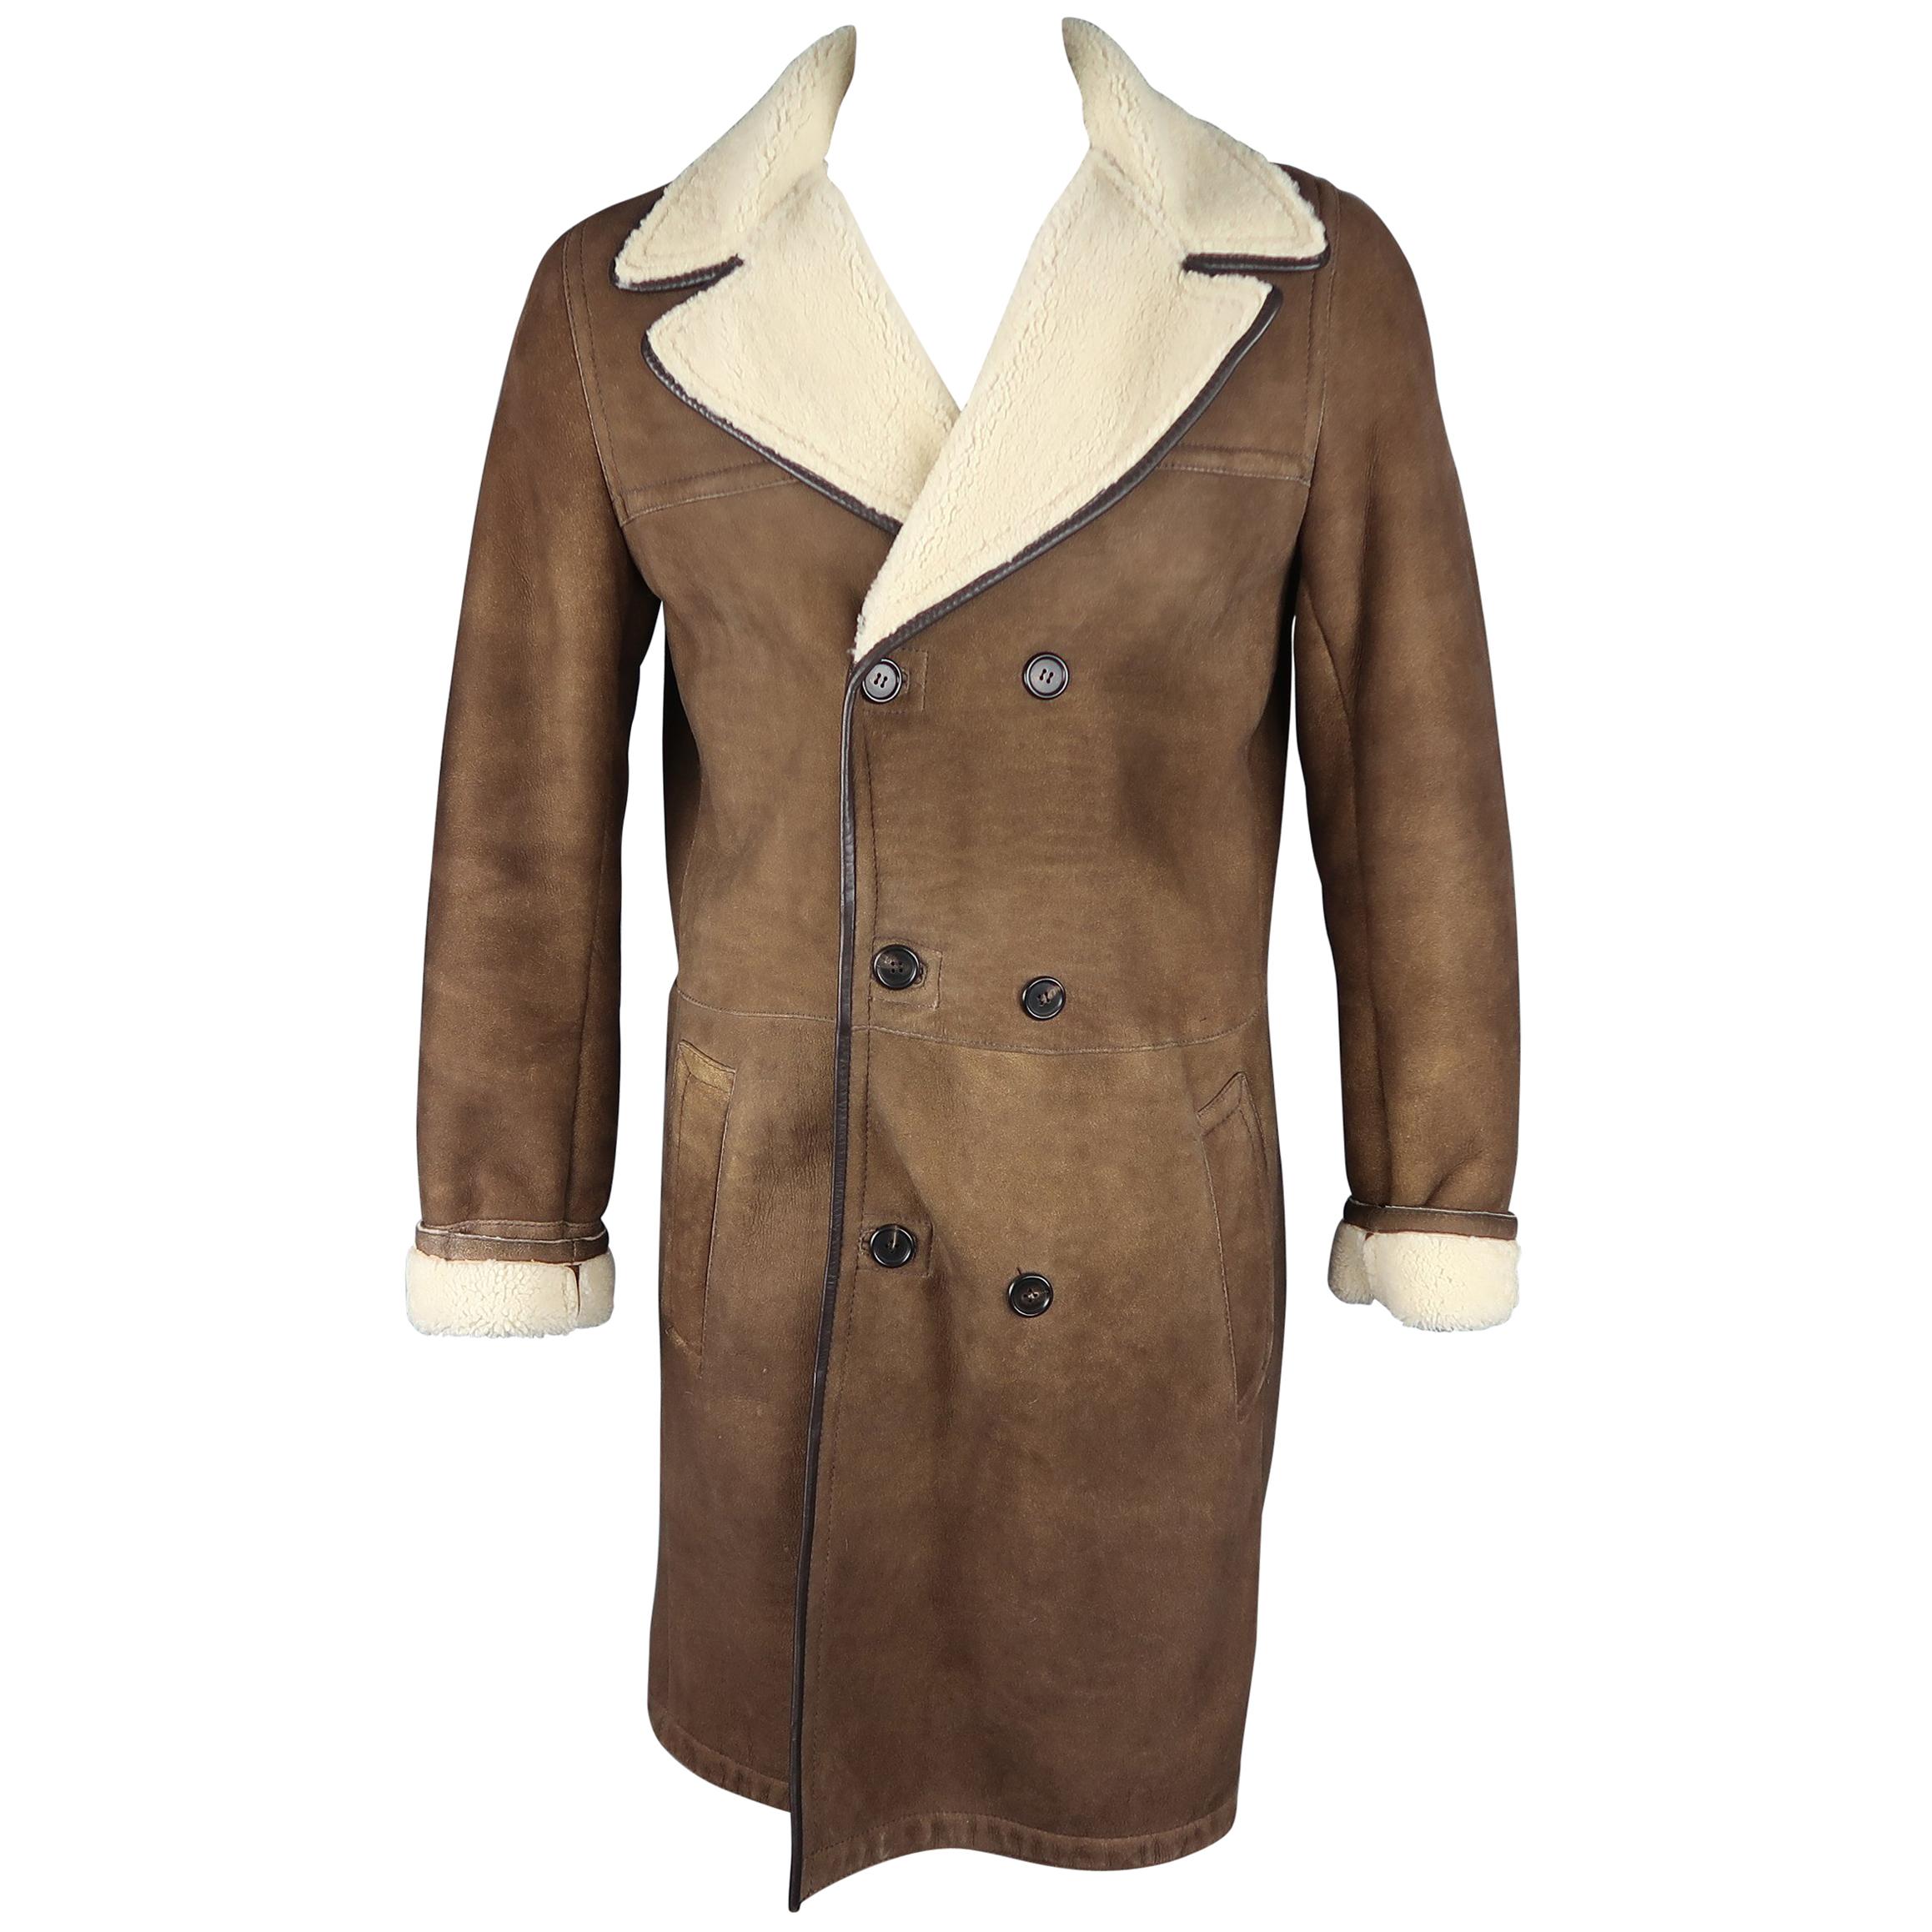 PRADA 44 Light Brown Shearling Double Breasted Coat